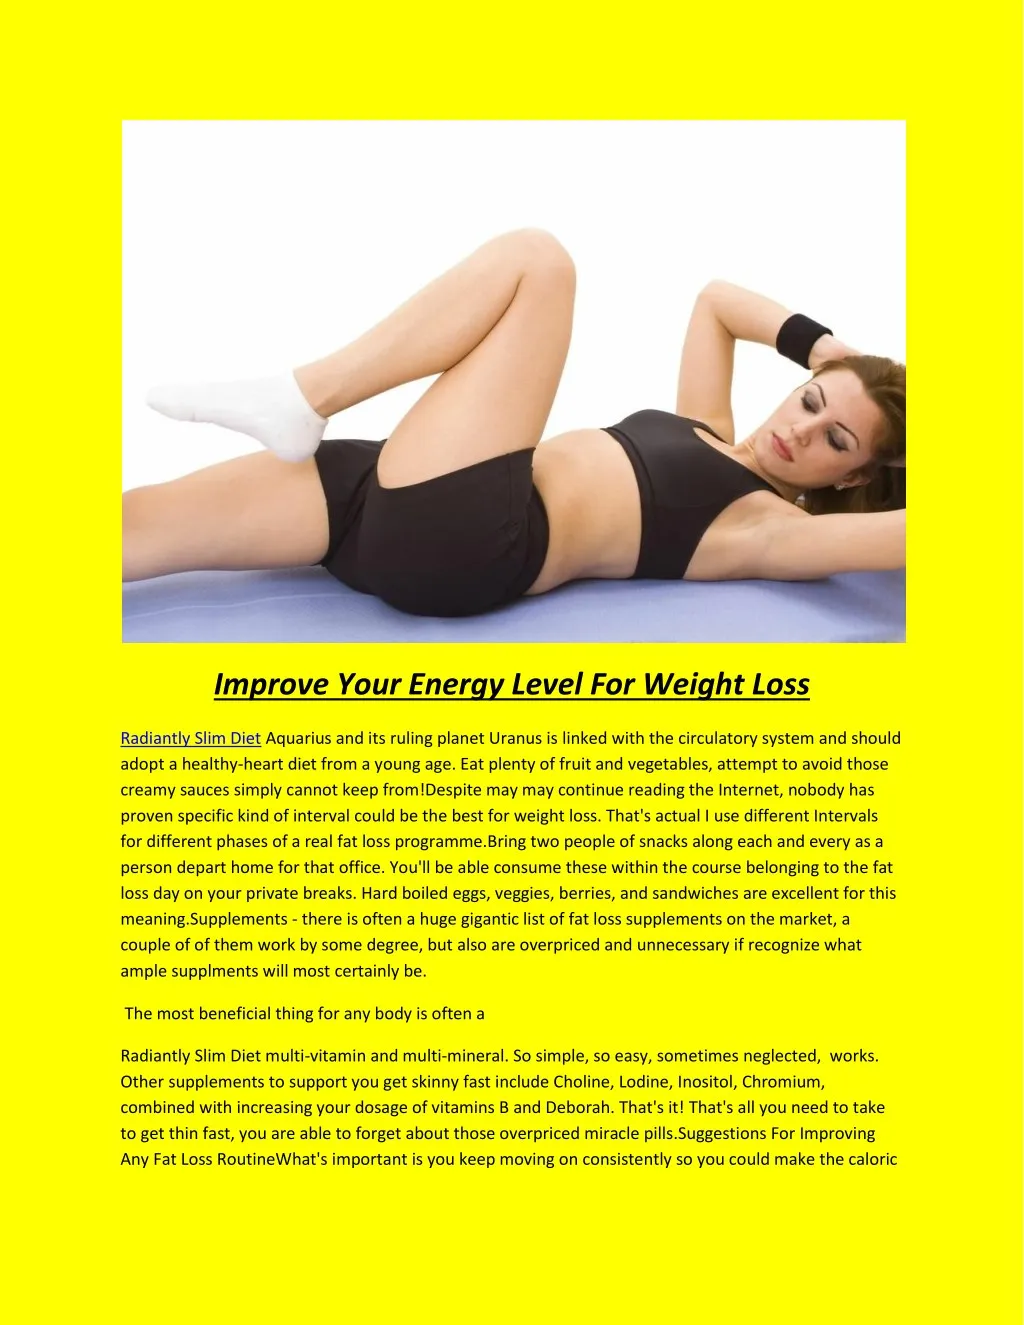 improve your energy level for weight loss